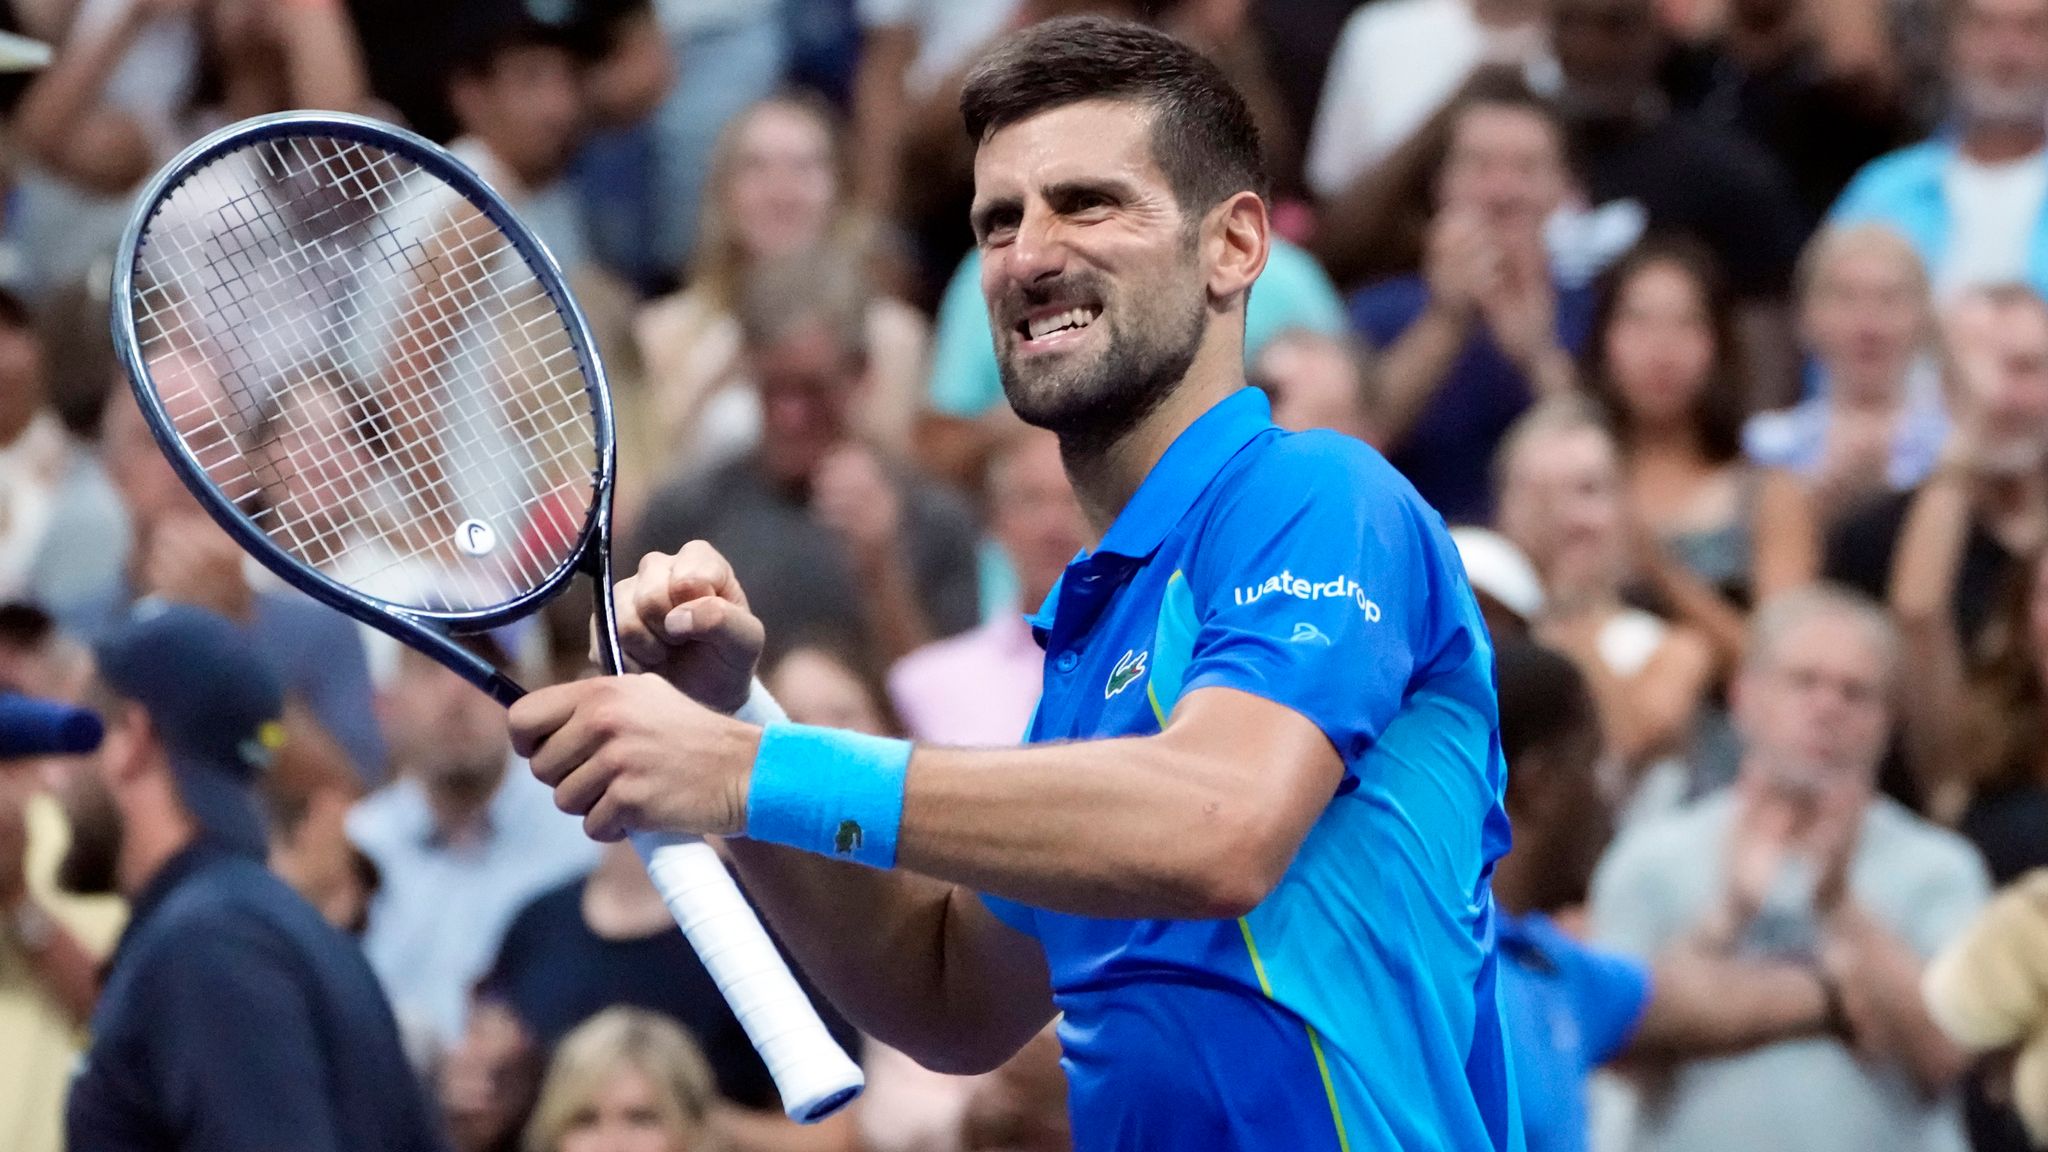 US Open Novak Djokovic booked his spot in the quarter-finals where he will face American Taylor Fritz Tennis News Sky Sports